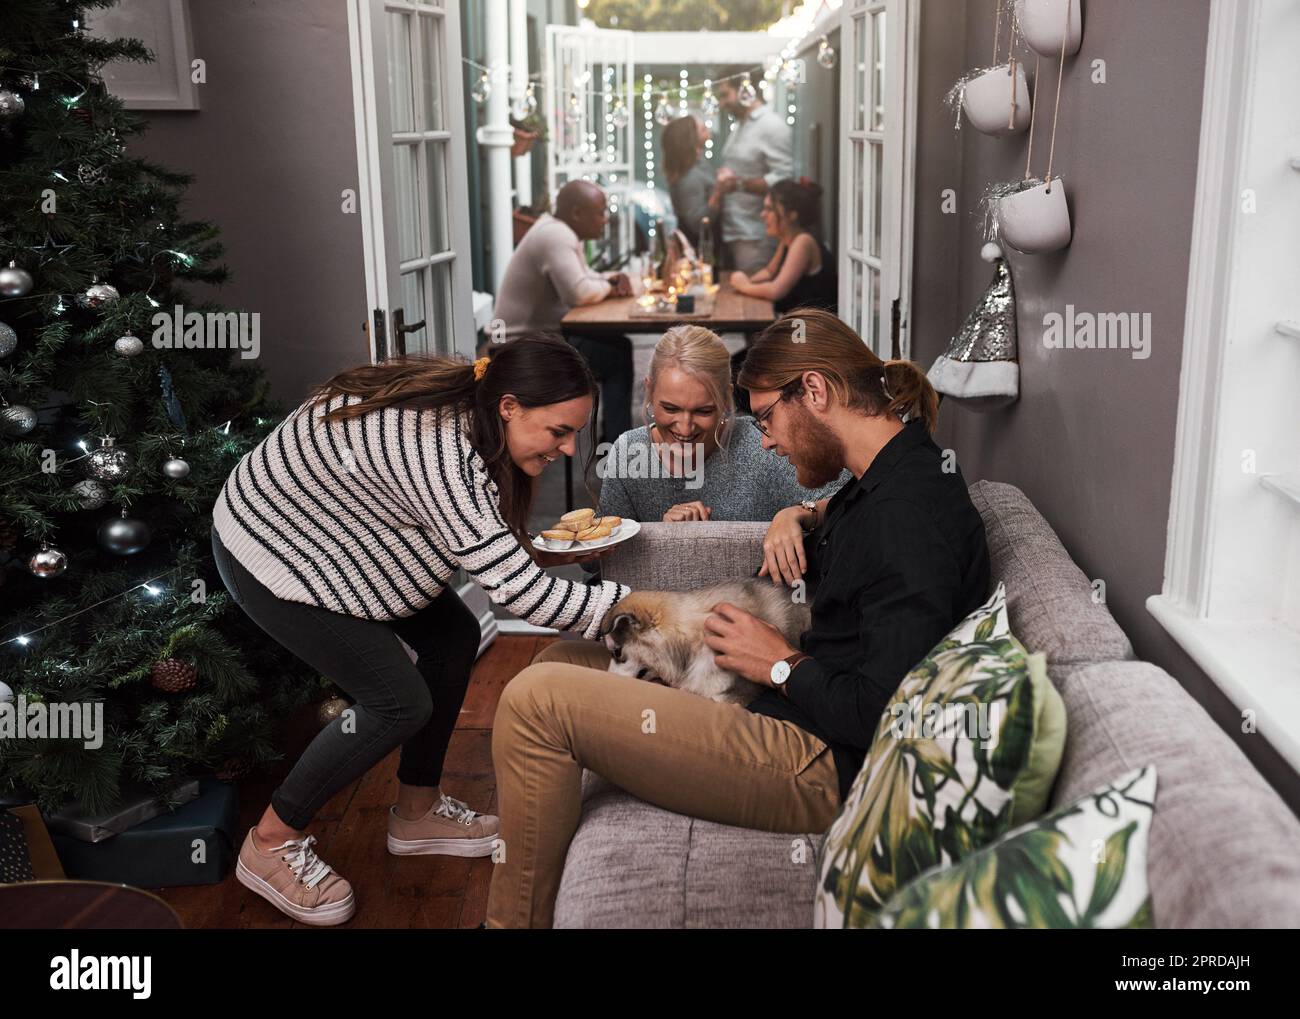 You are coming home with me. two cheerful friends hanging out together with a puppy in the living room at home during christmas time. Stock Photo